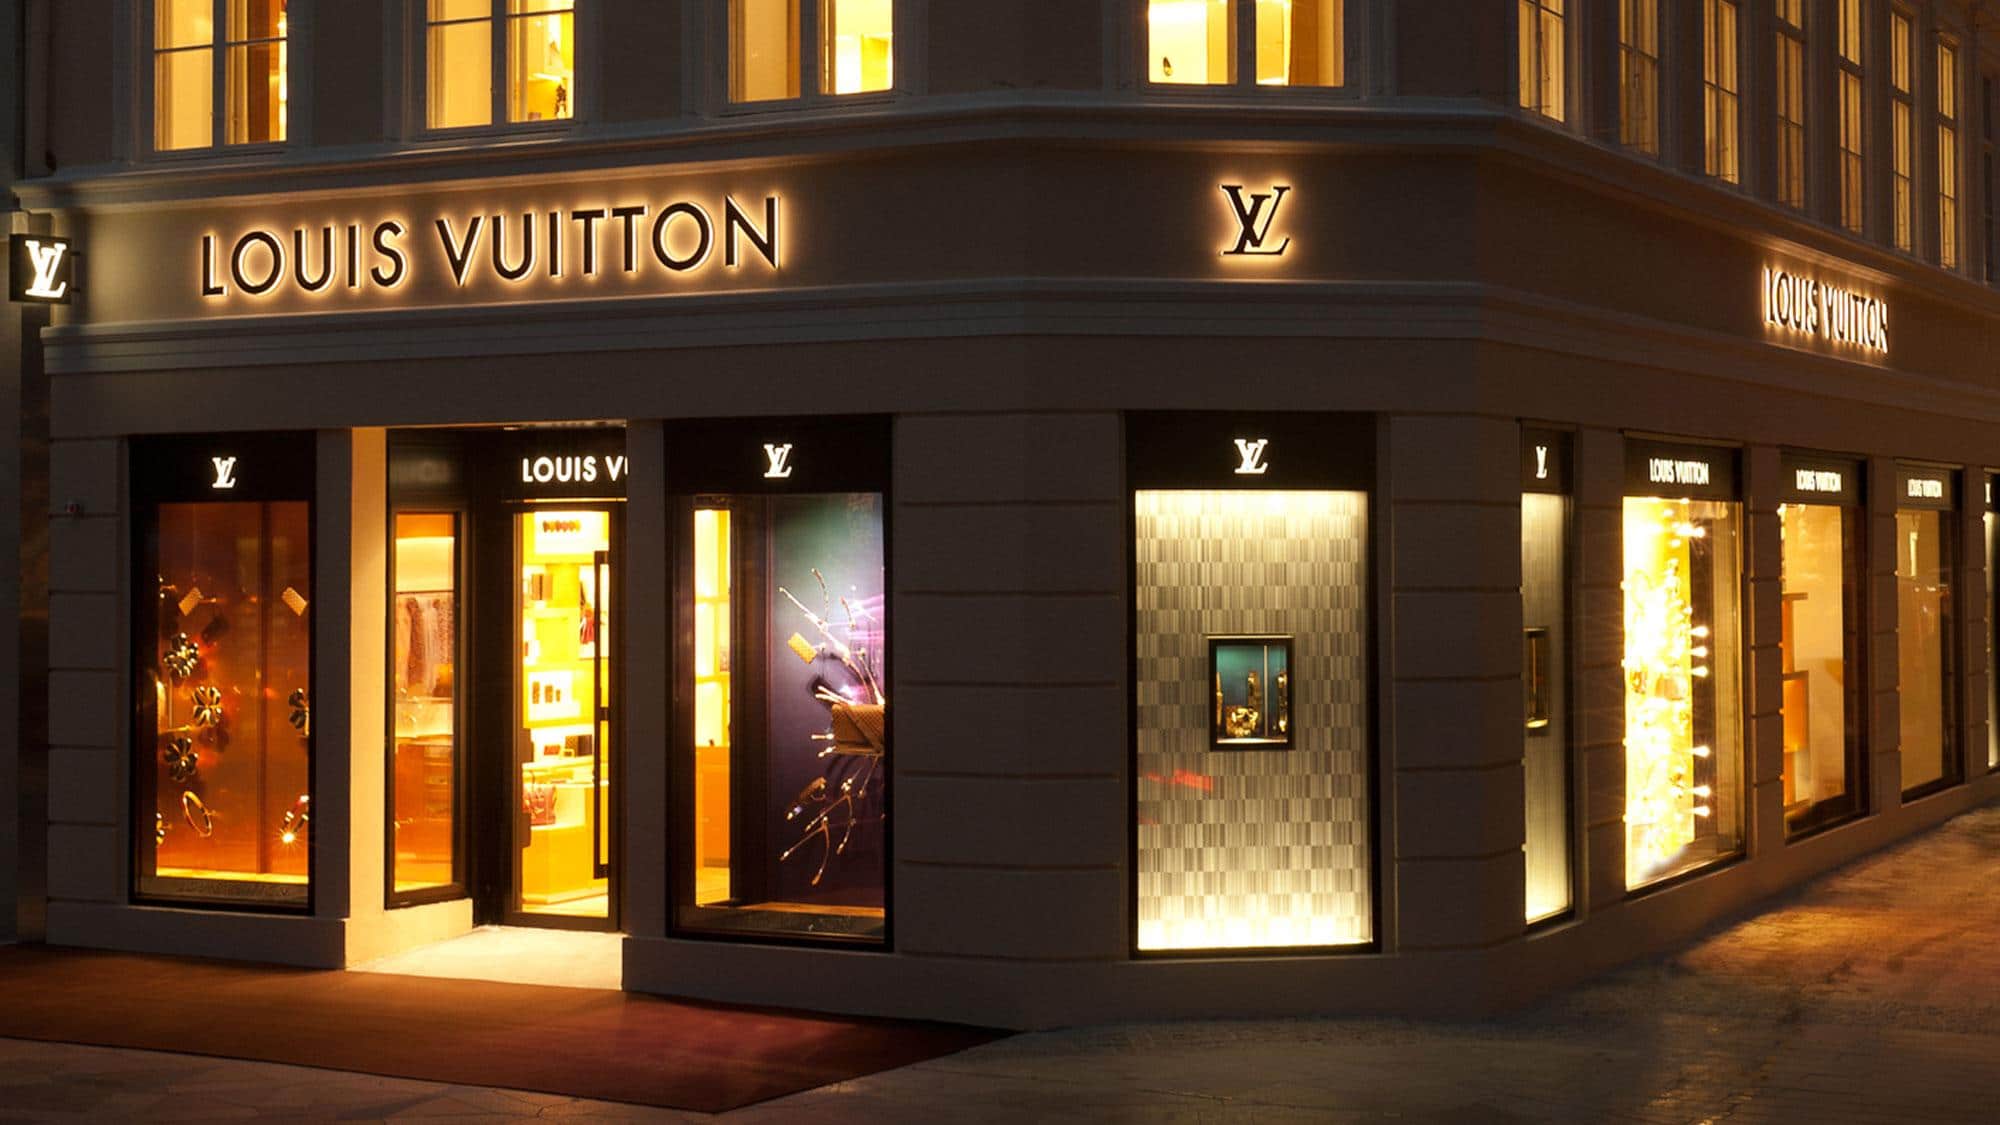 Louis Vuitton: Using Digital Presence for Brand Repositioning and